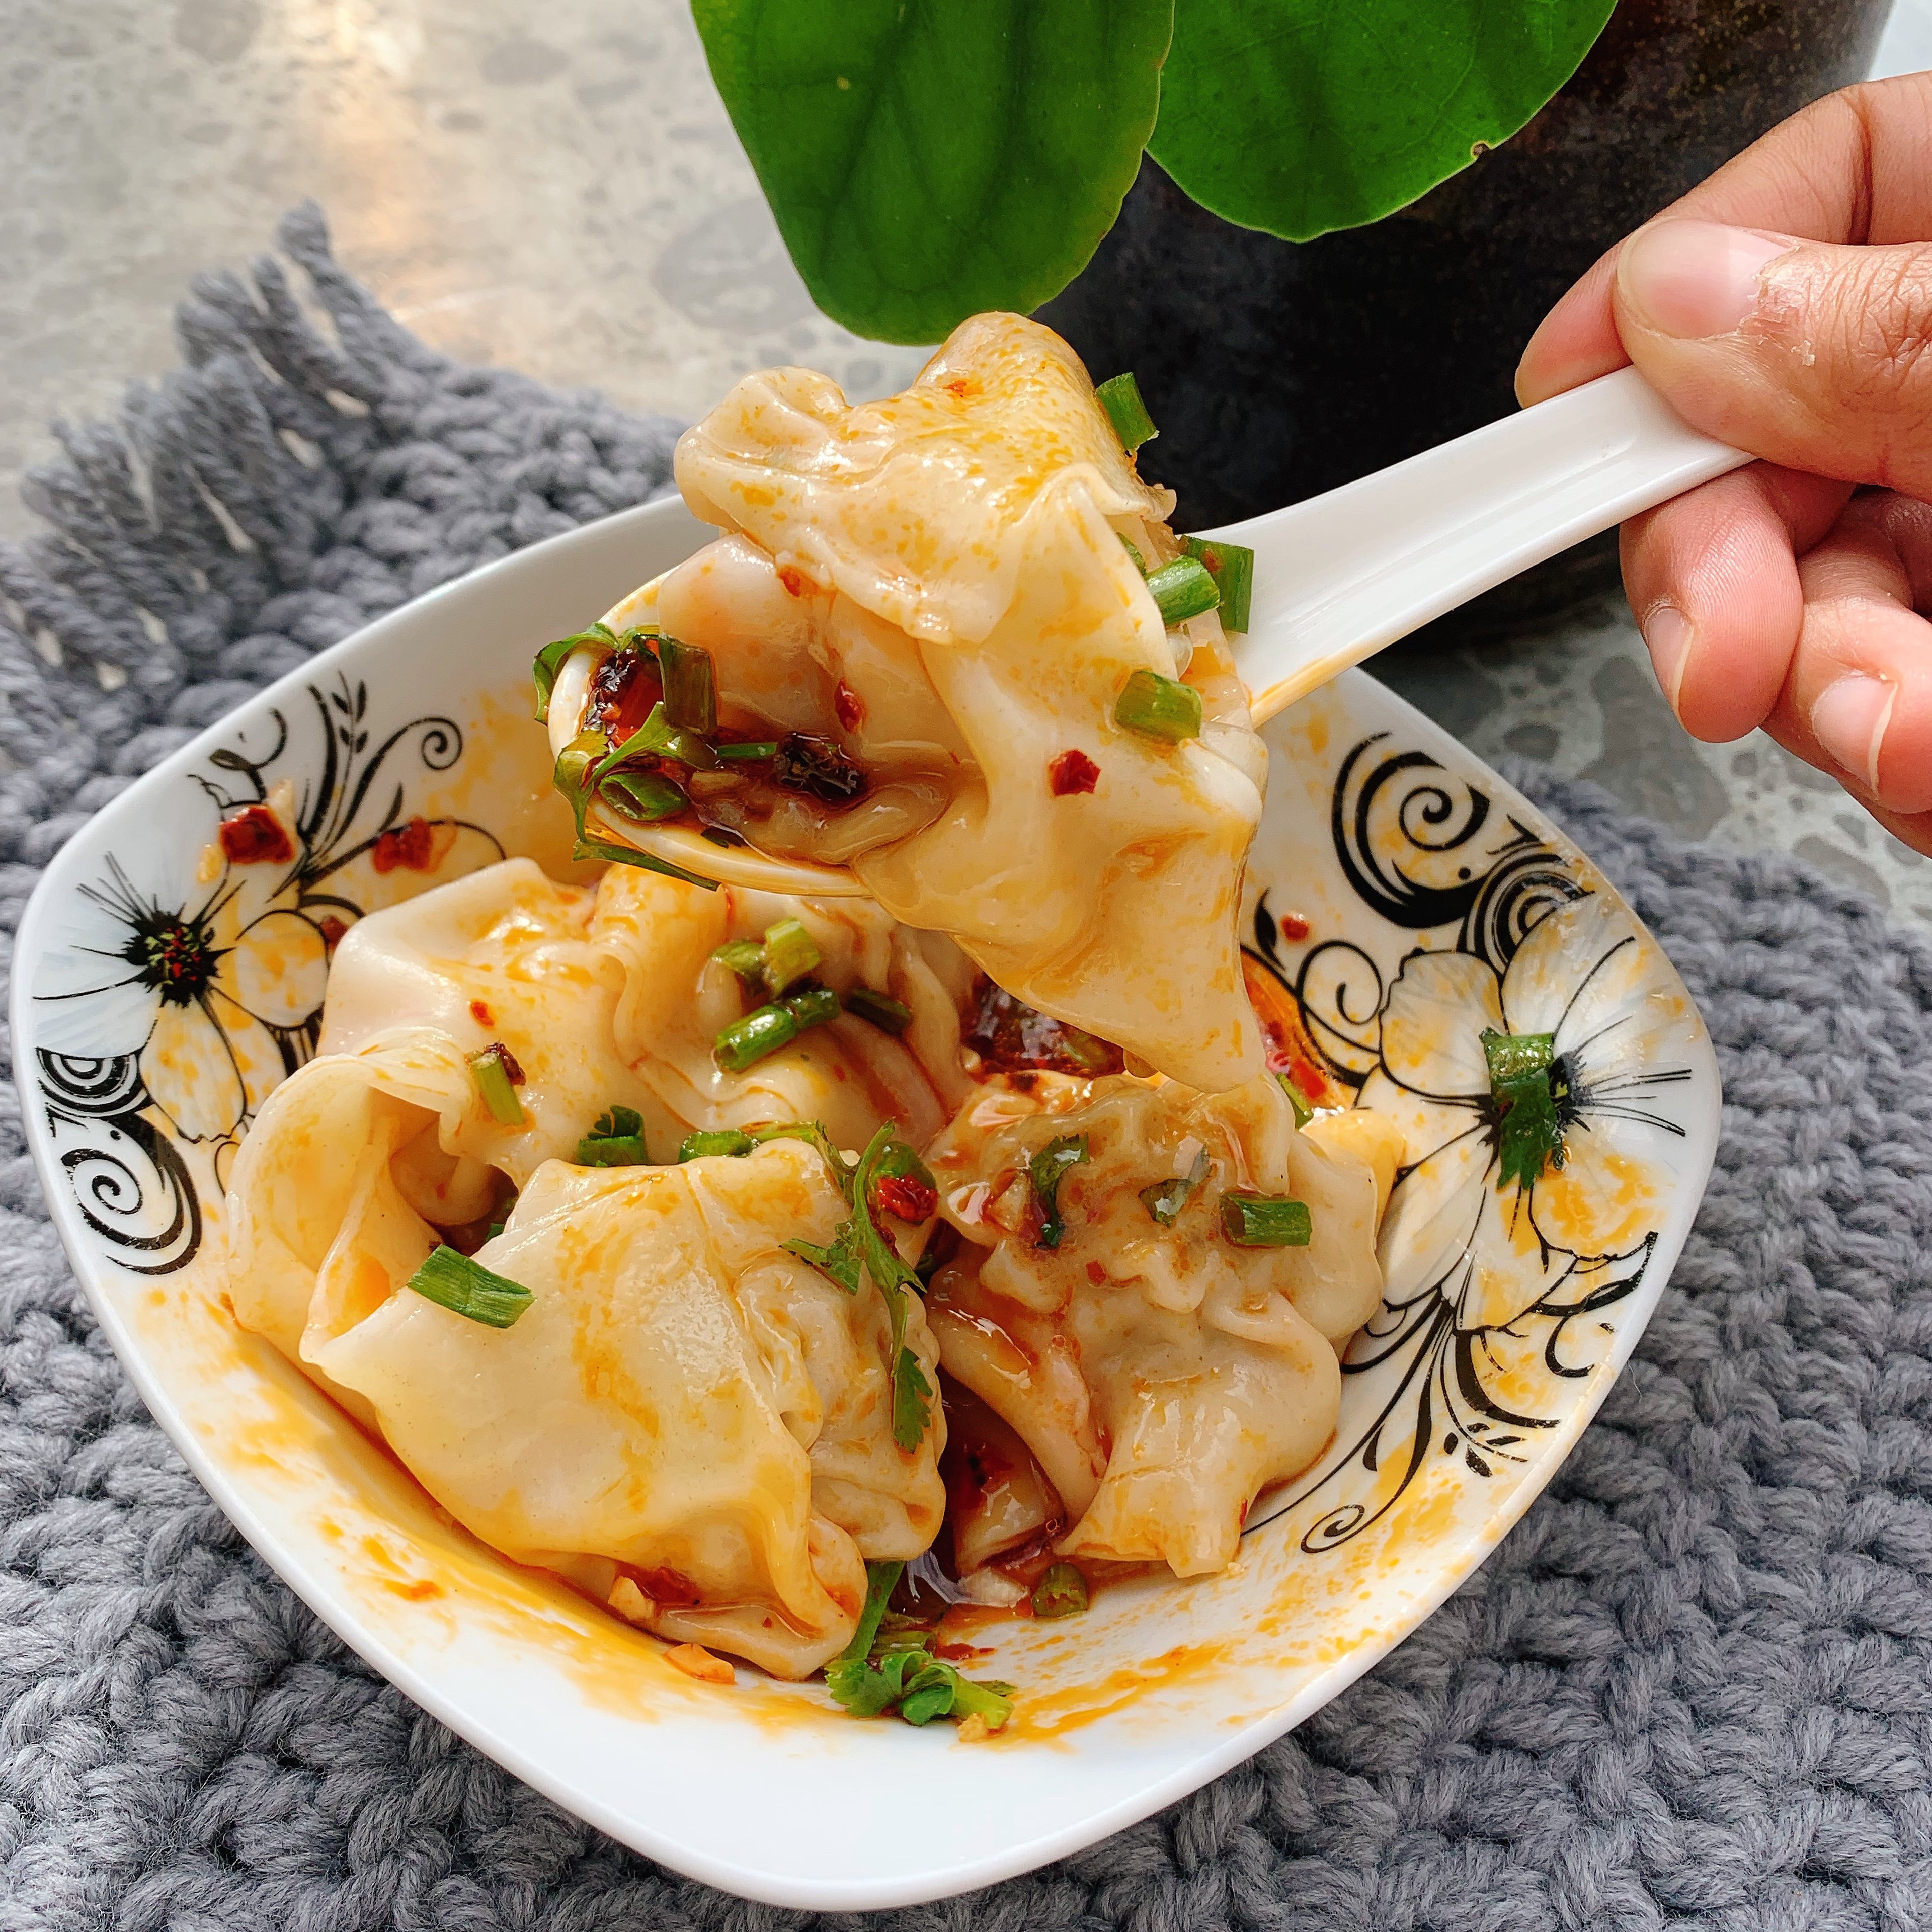 Sichuan-style spicy wontons